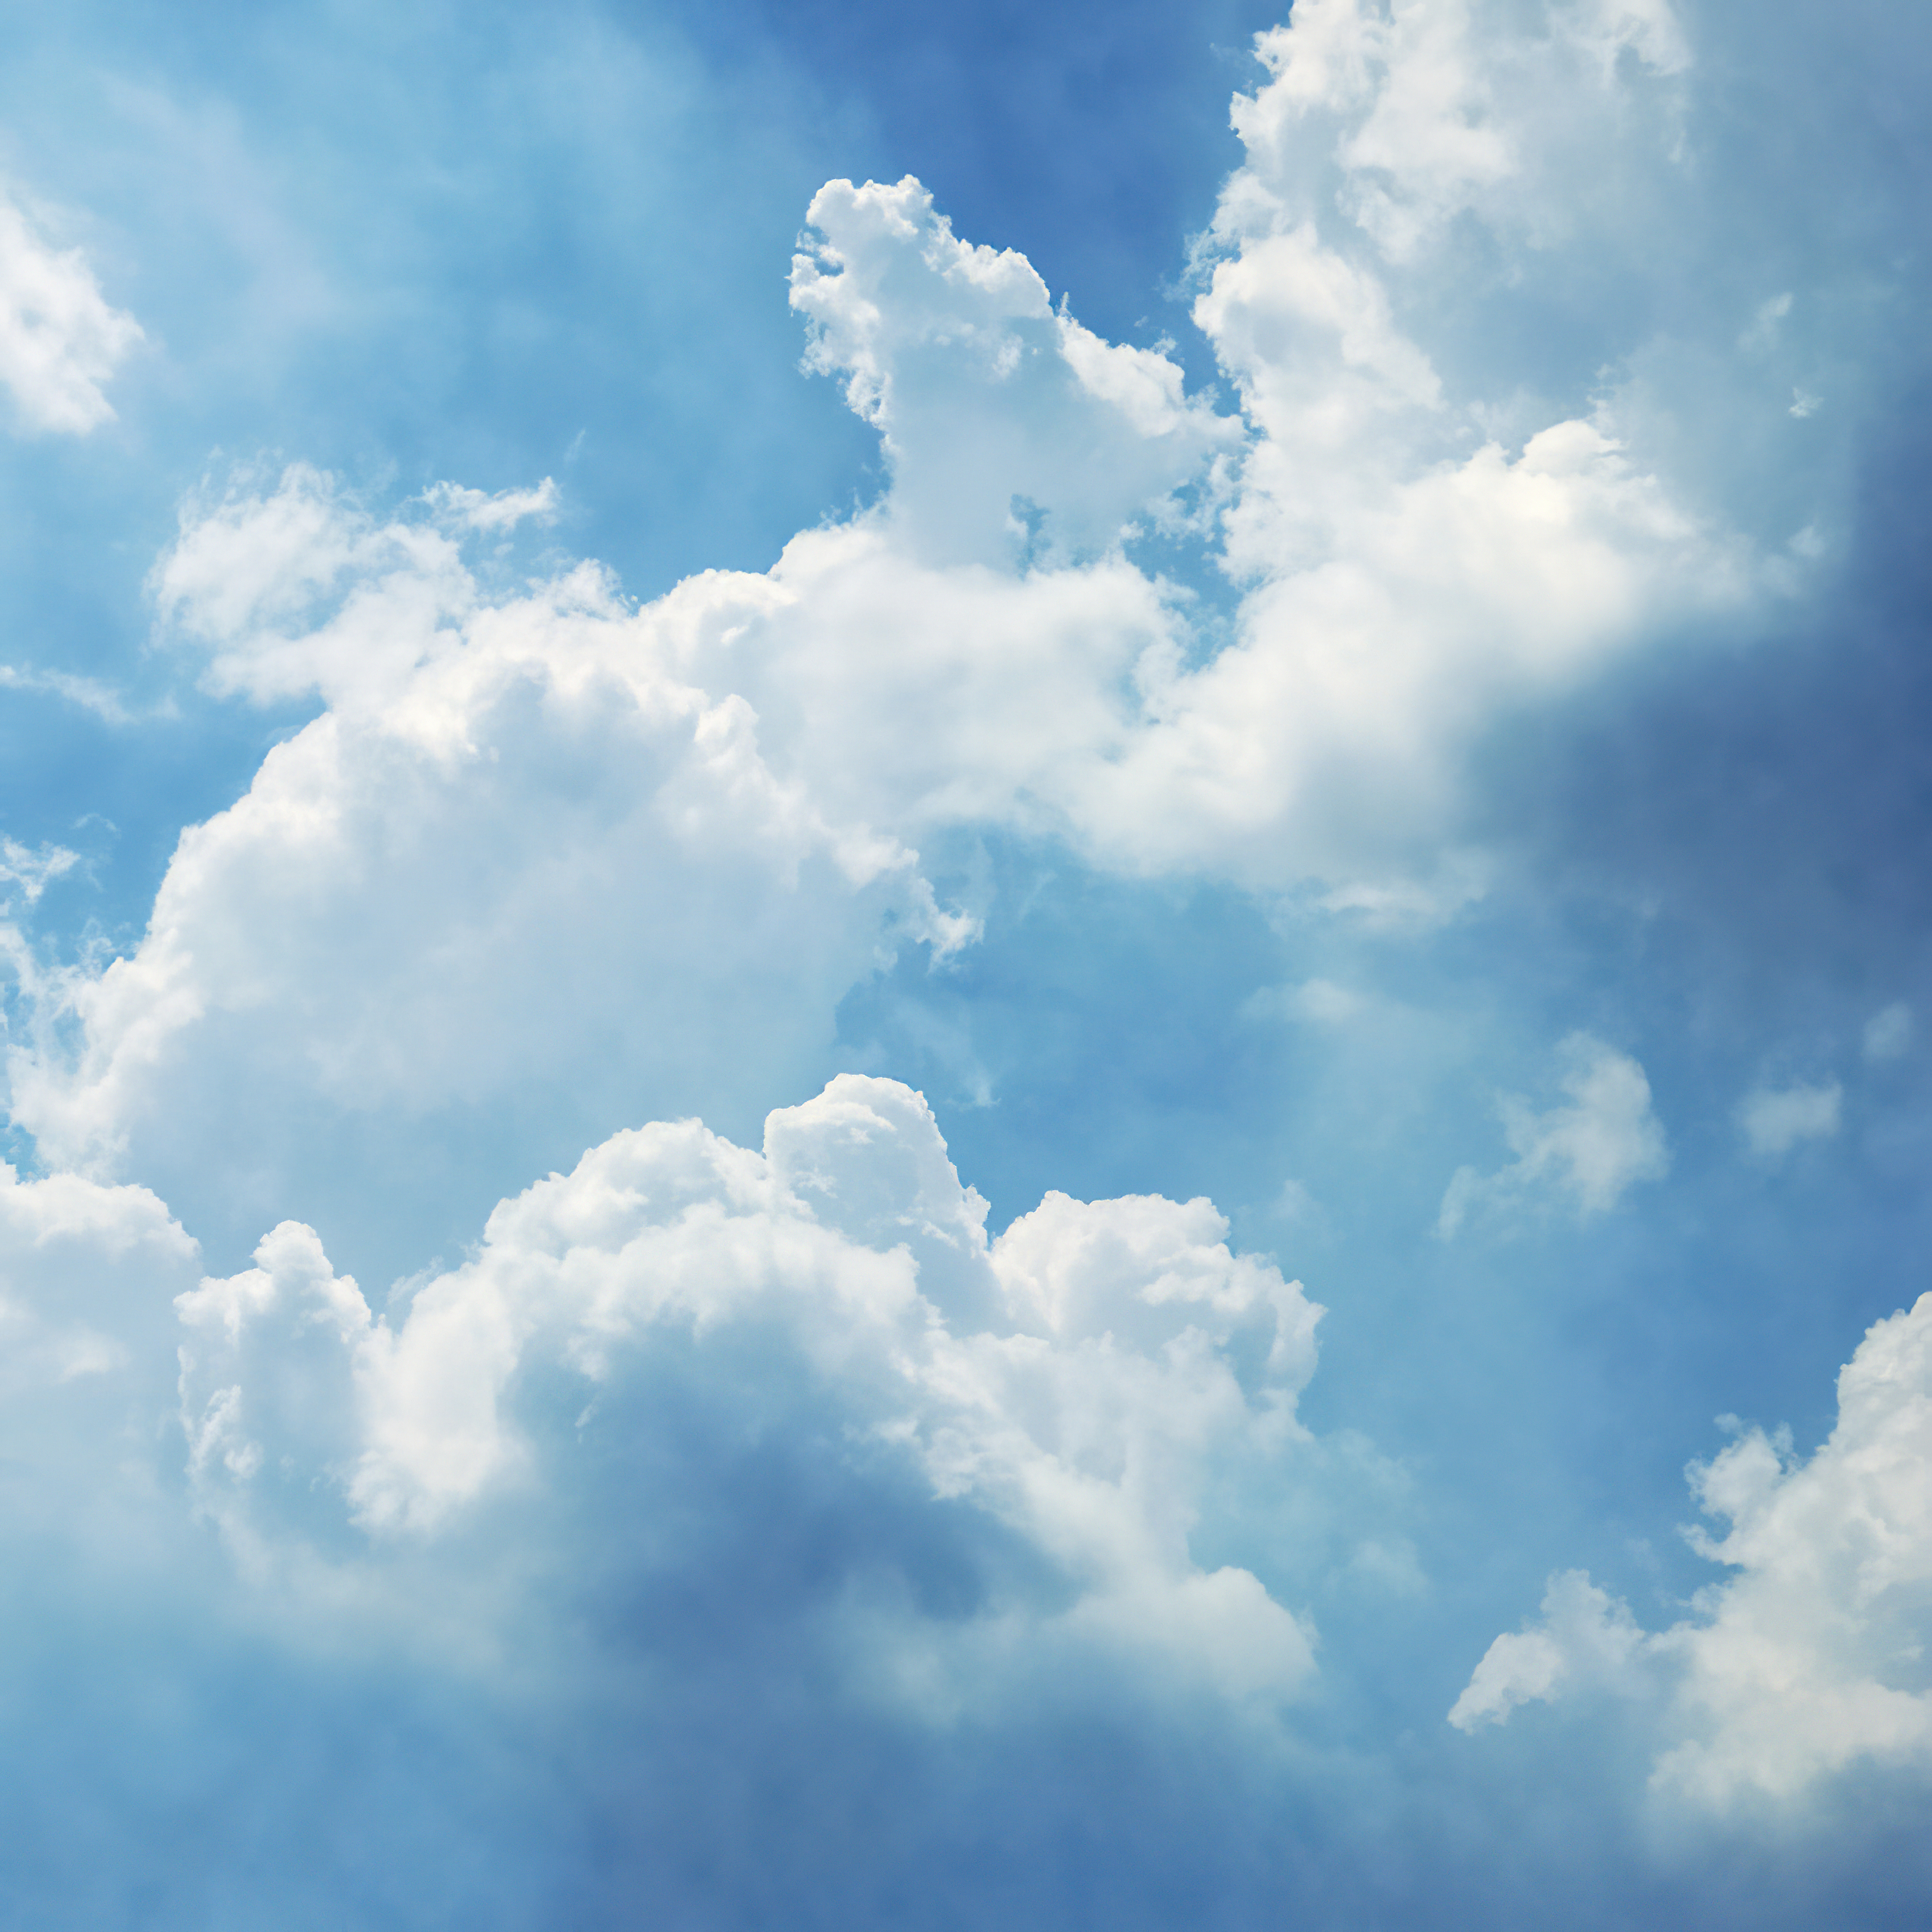 Blue Sky with Cloud Background by anulubi on DeviantArt